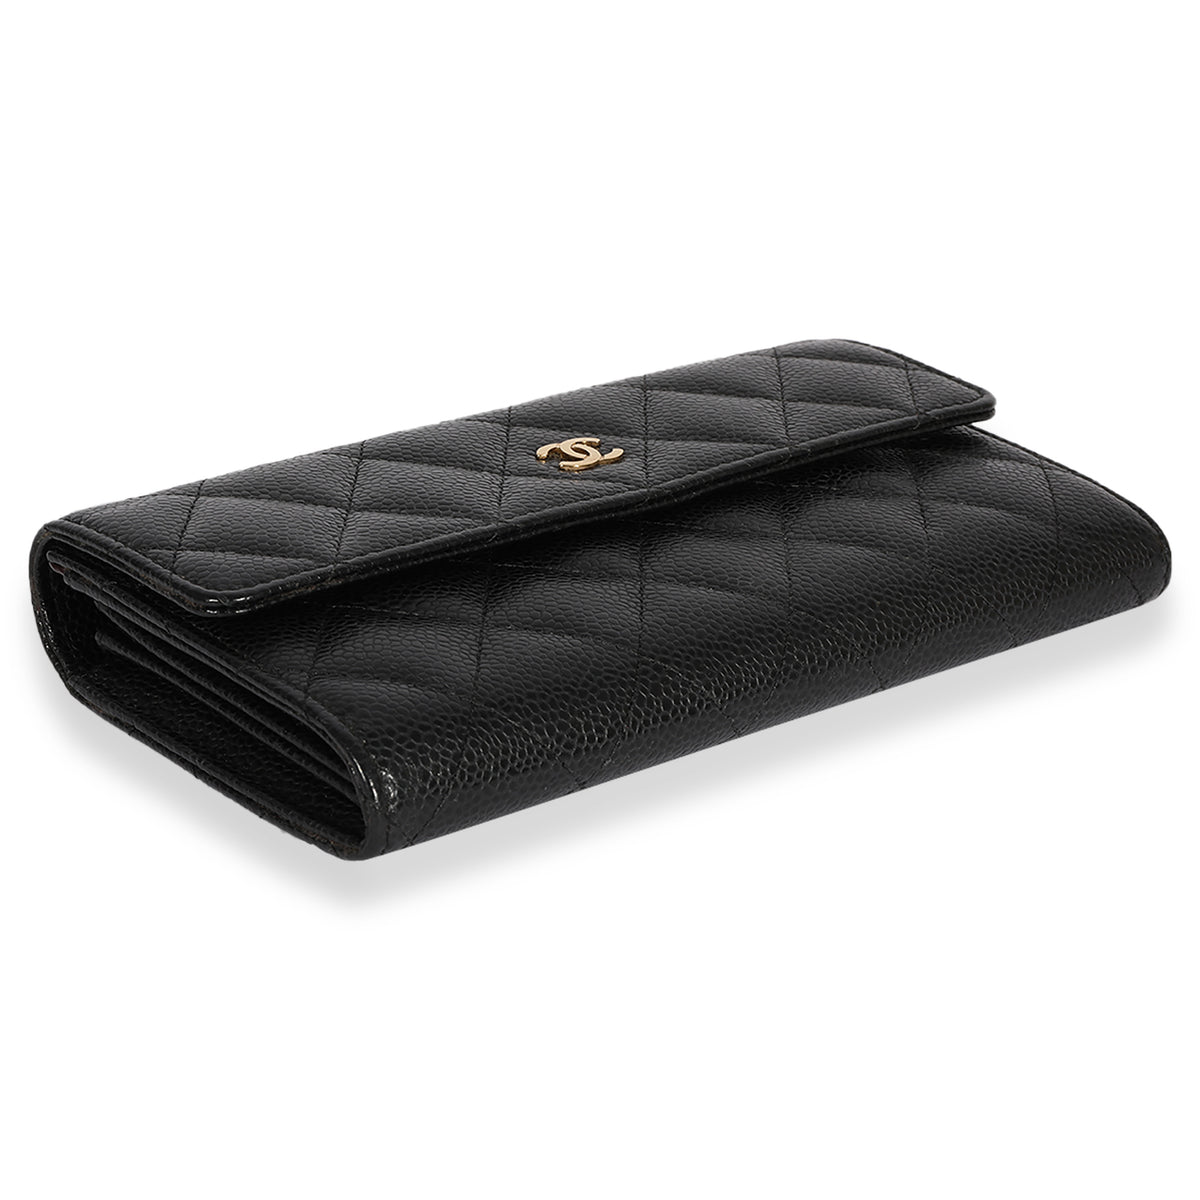 Chanel Black Quilted Caviar Long Flap Wallet Q6A0170FKB024